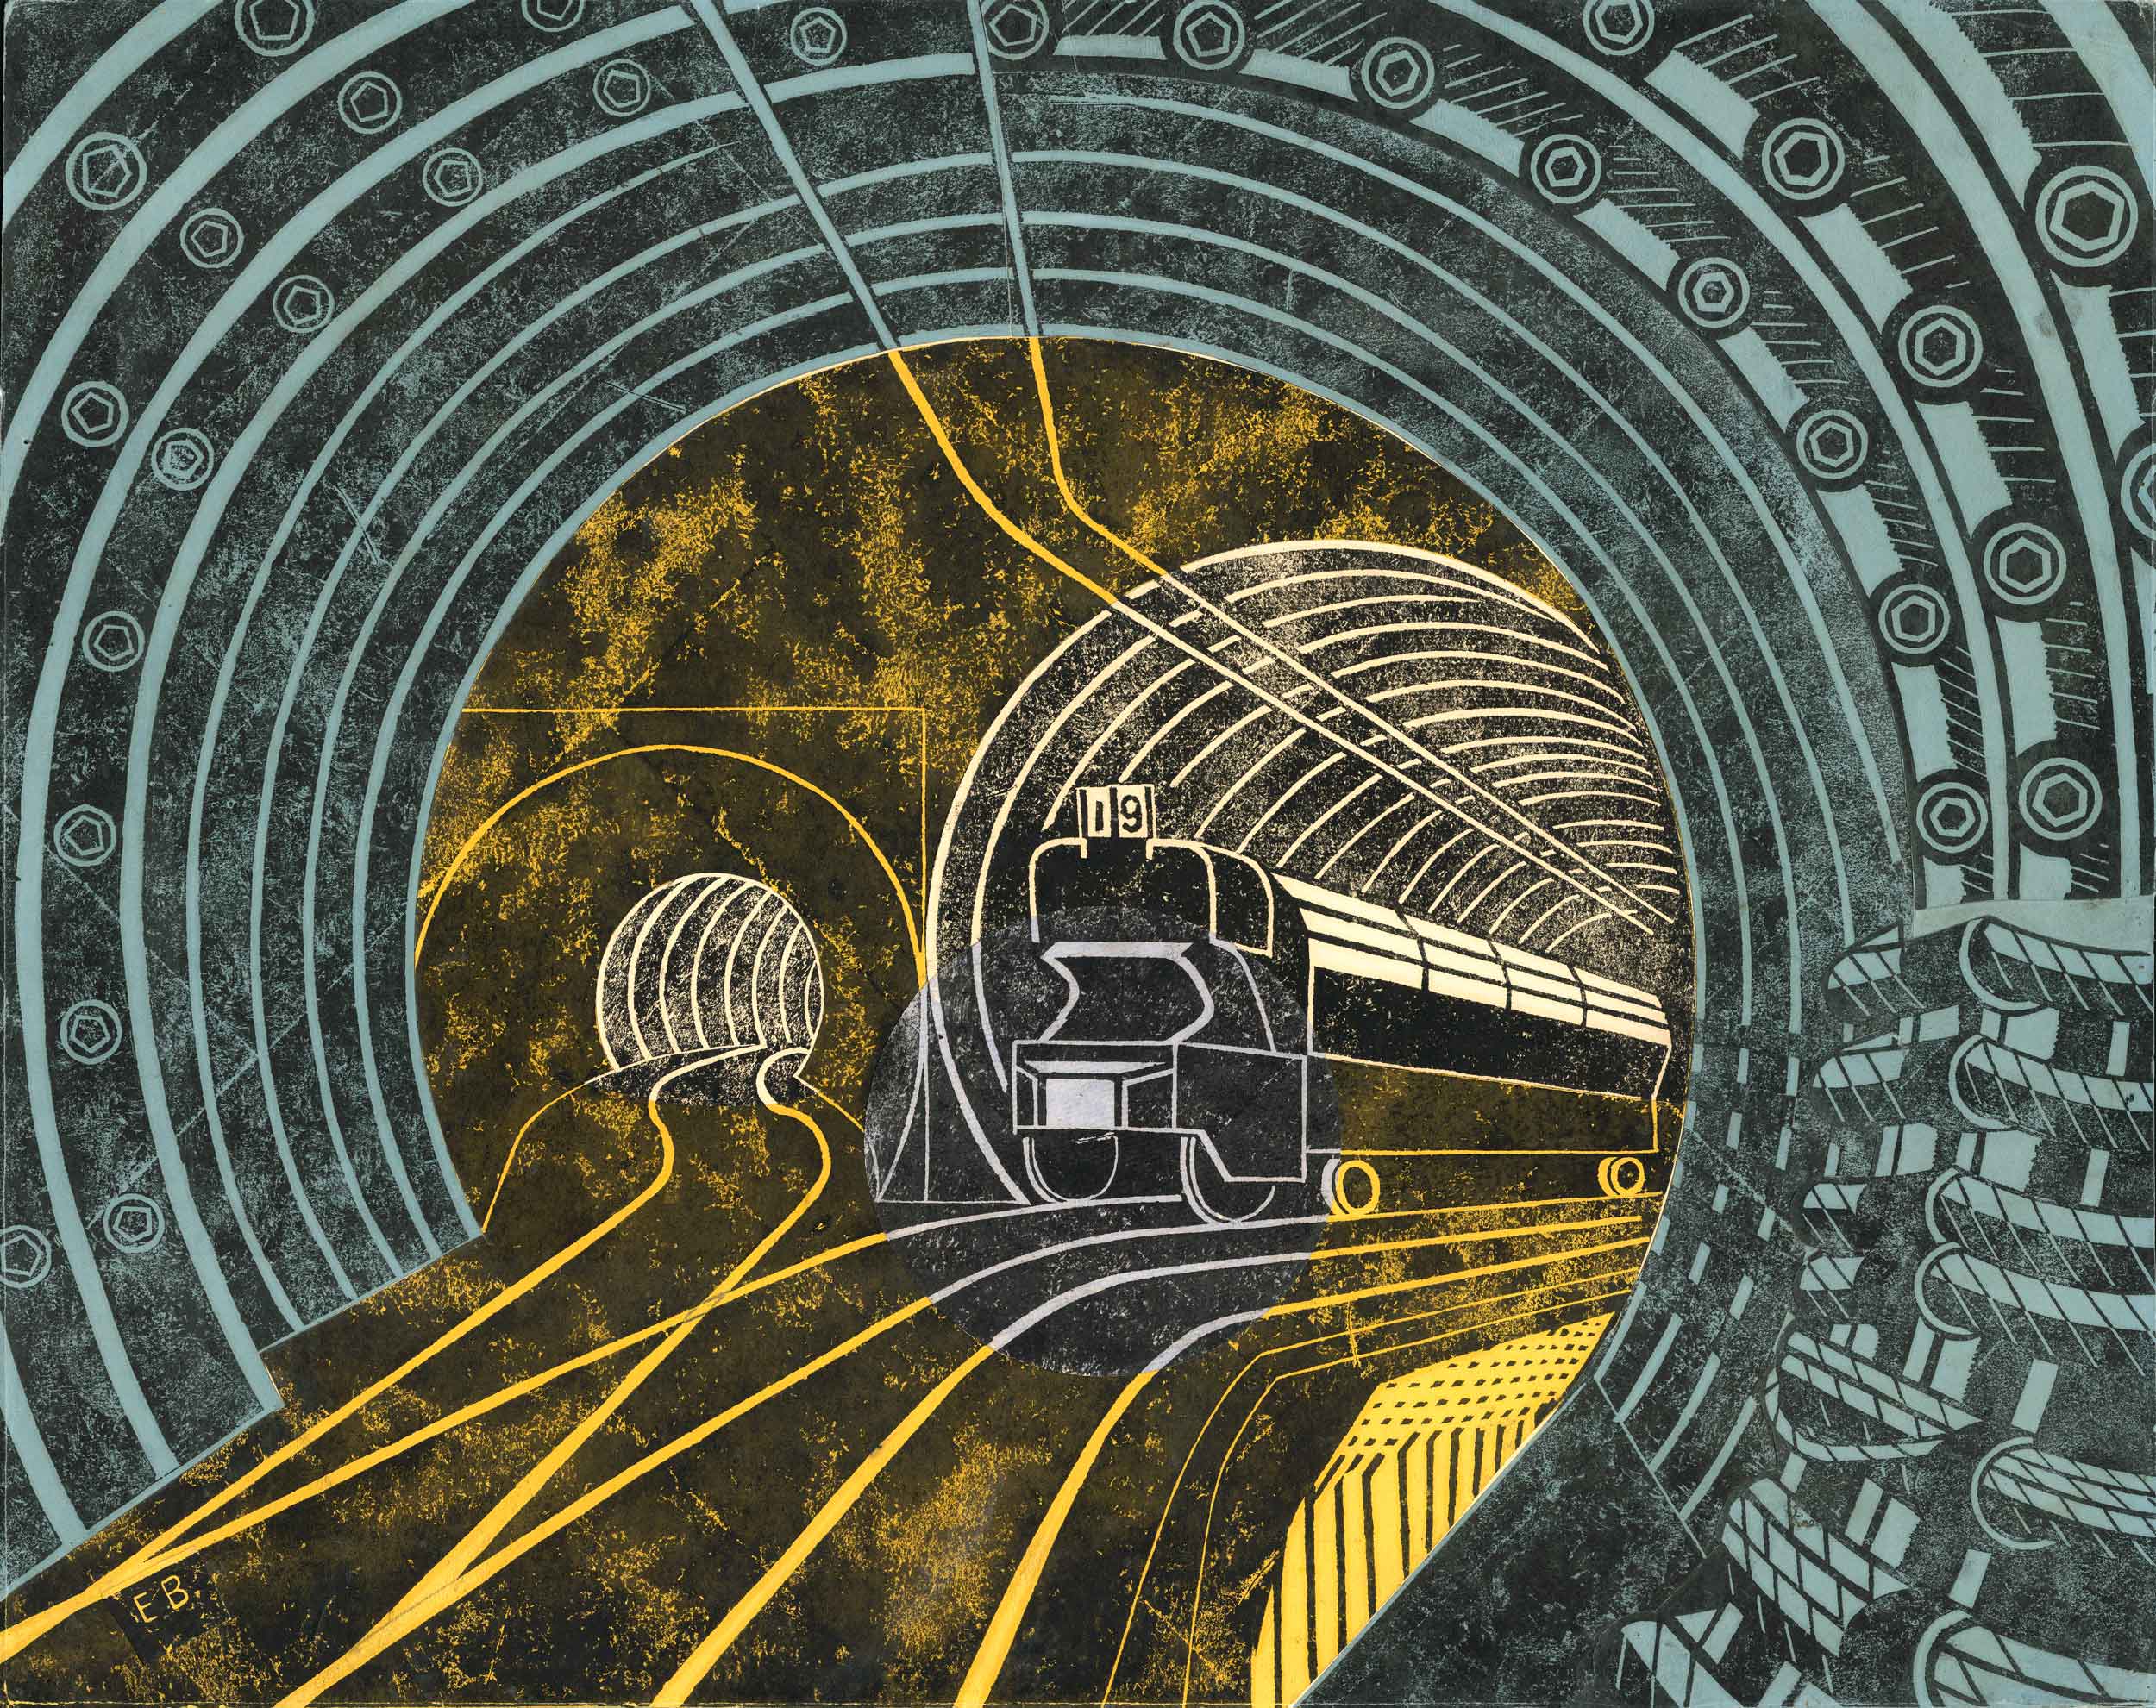 Artwork for a poster of the Post Office Railway by Edward Bawden